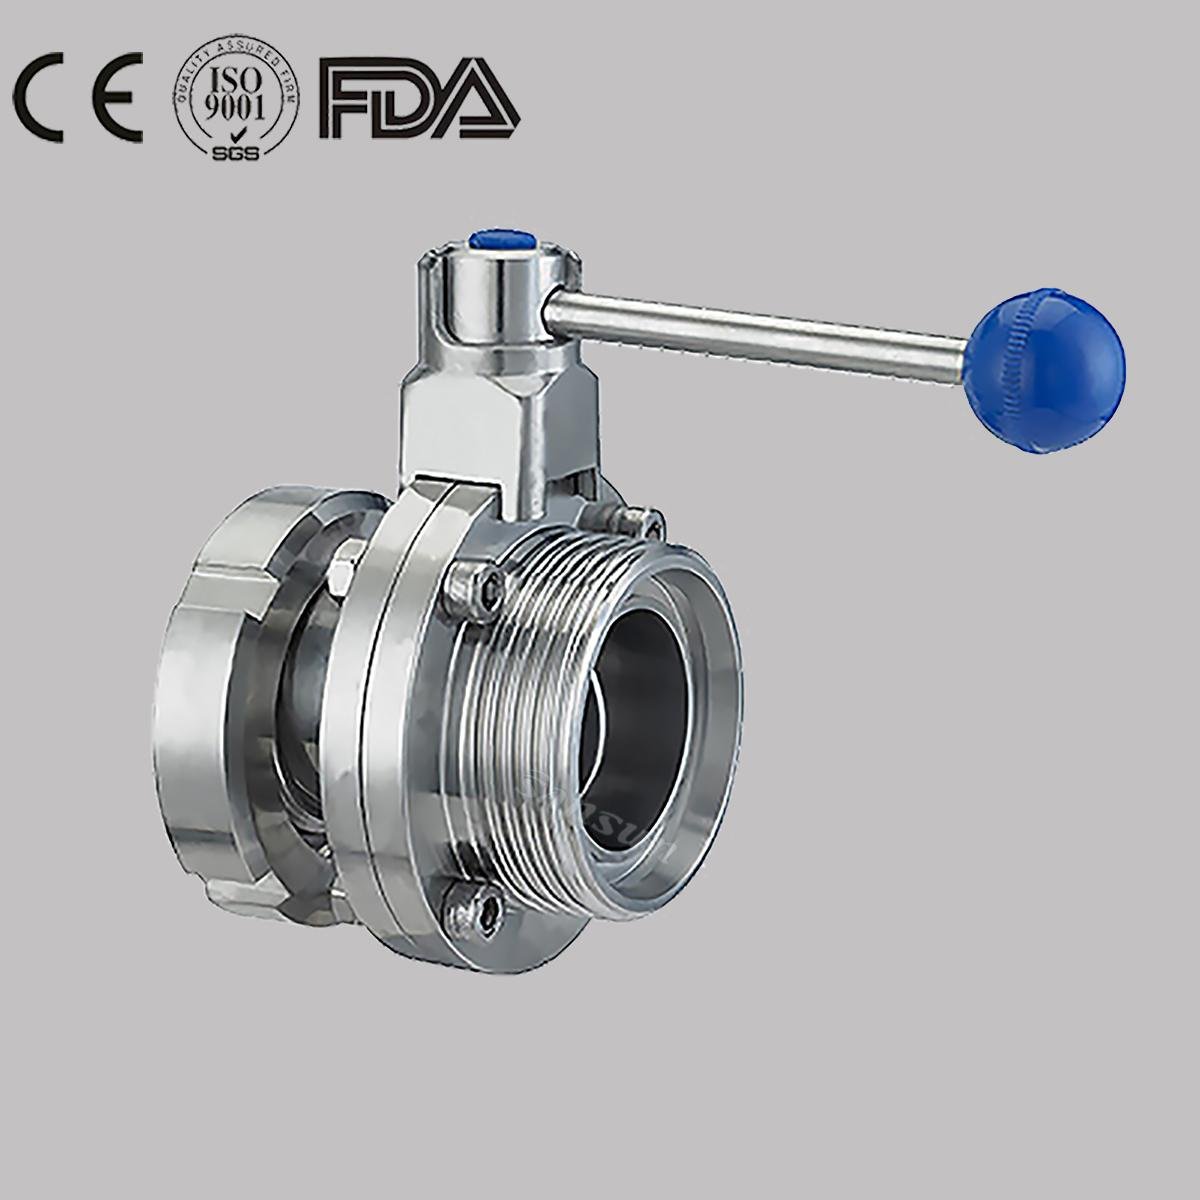 Stainless Steel Food Grade Sanitary Hygienic Manual Flange Male Butterfly Valve 4